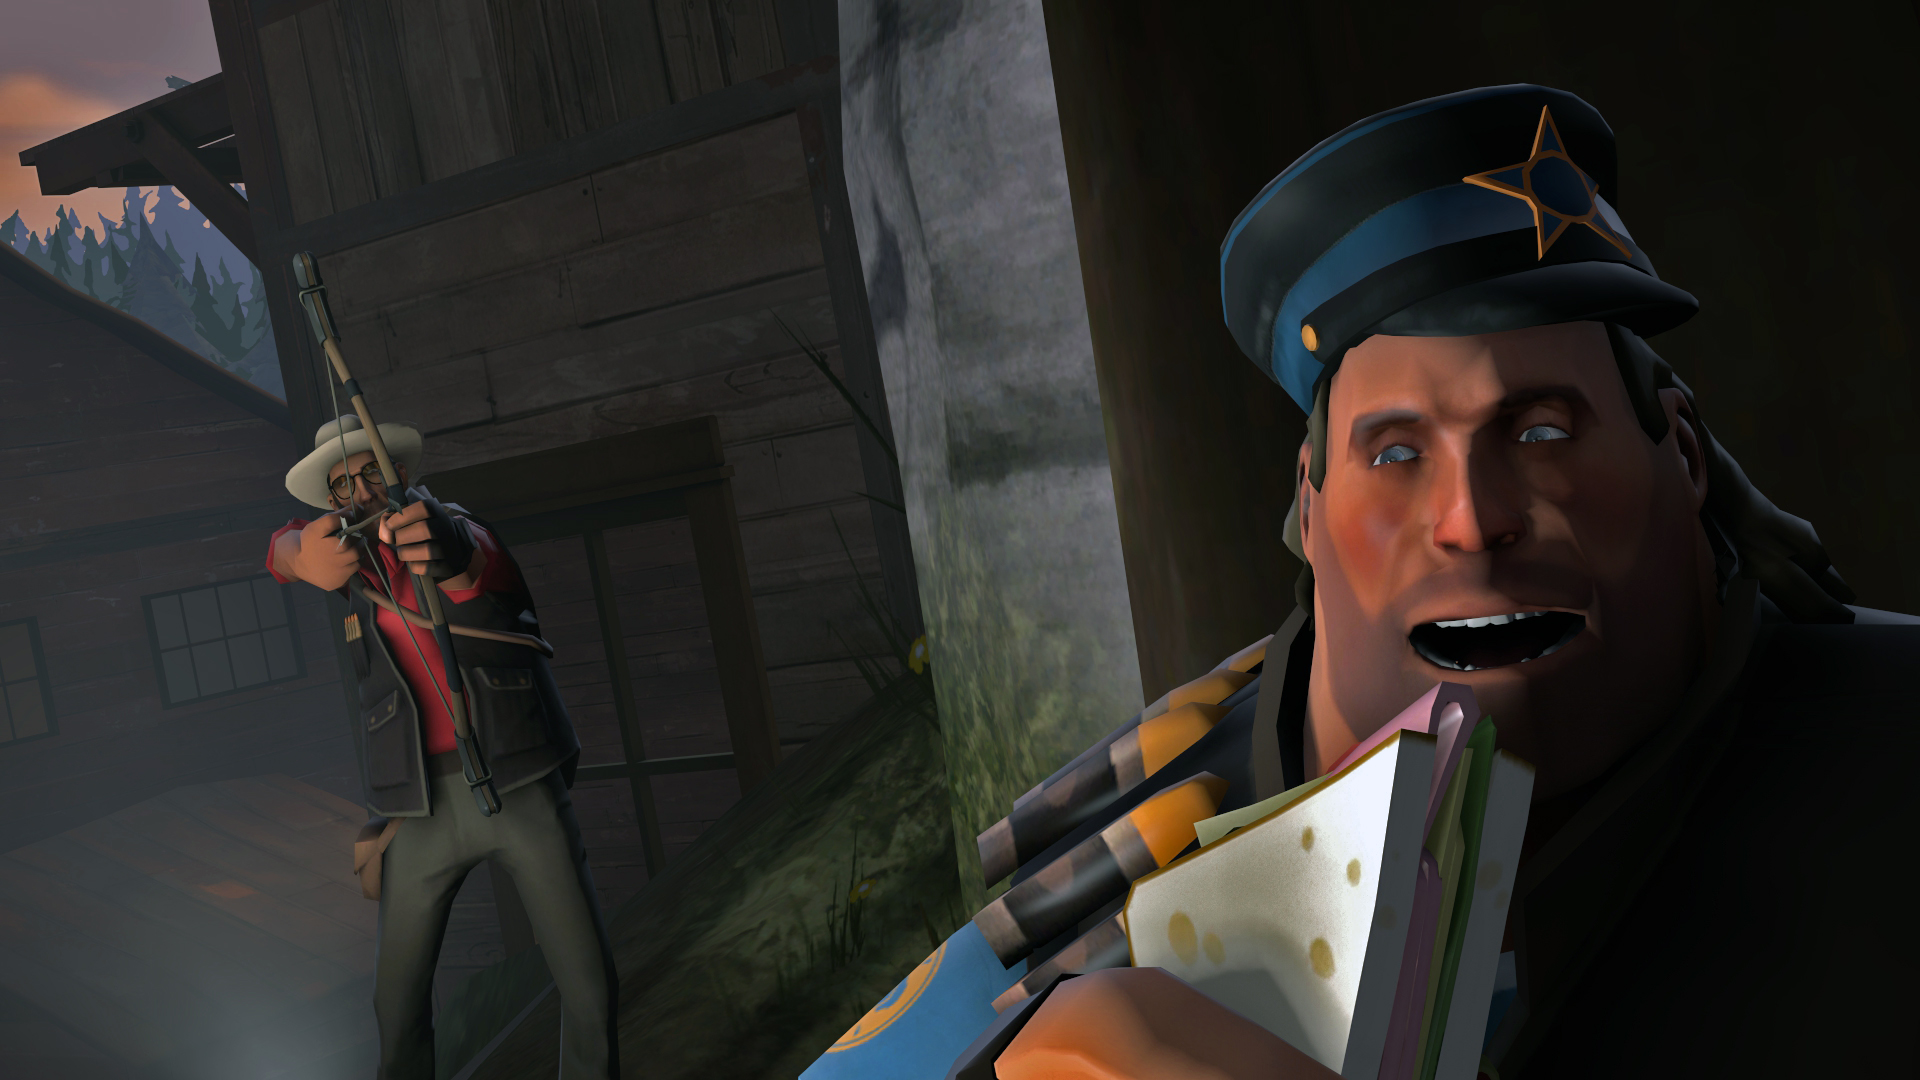 team fortress 2, video game, heavy (team fortress), sniper (team fortress), team fortress